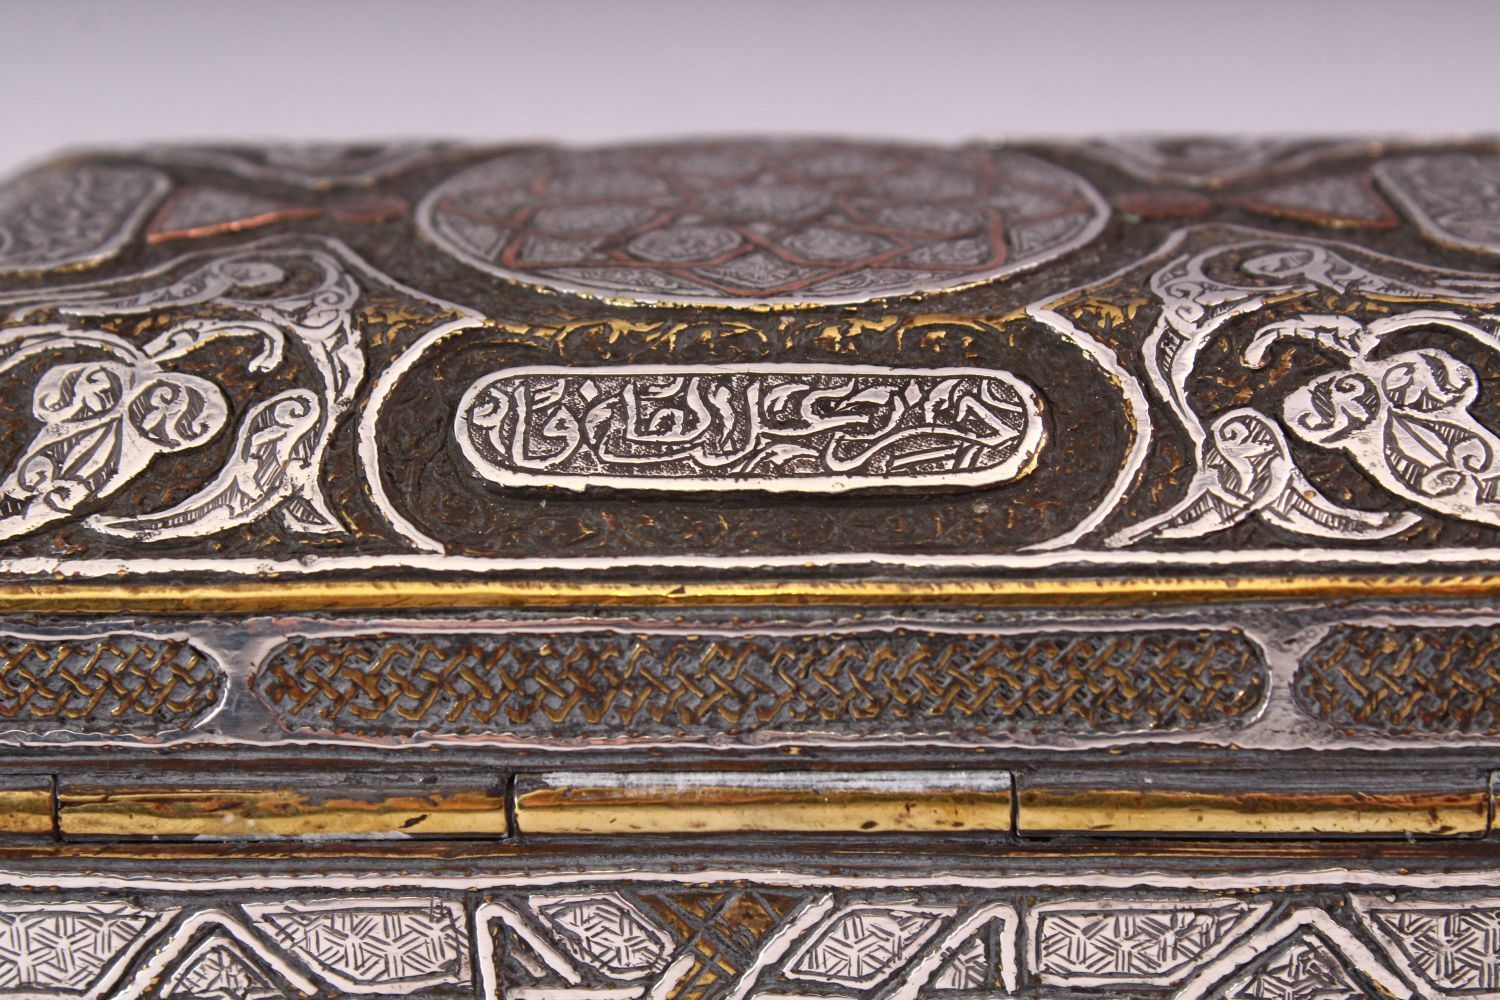 A GOOD 19TH CENTURY SYRIAN SILVER, COPPER AND BRASS RECTANGULAR CASKET, with panels of calligraphy - Image 7 of 10